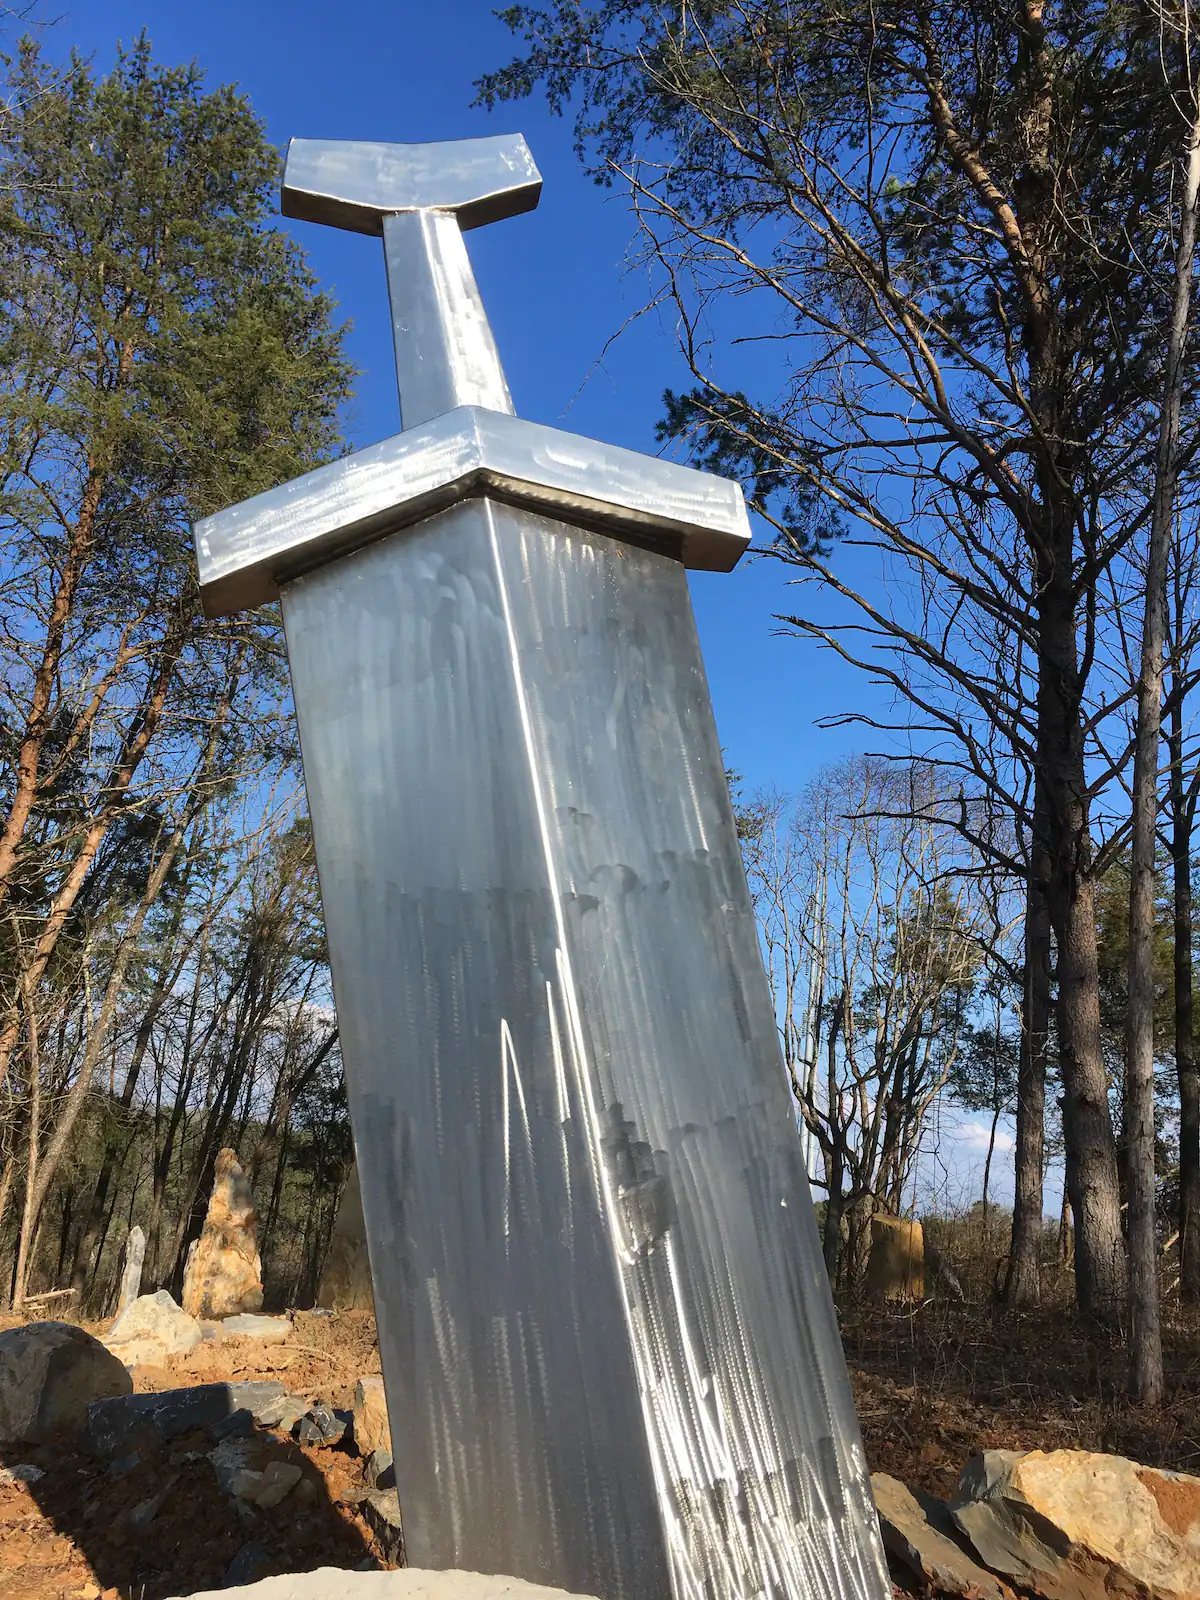 A giant sword statue is located in the forest near the Wizard’s Trolley.